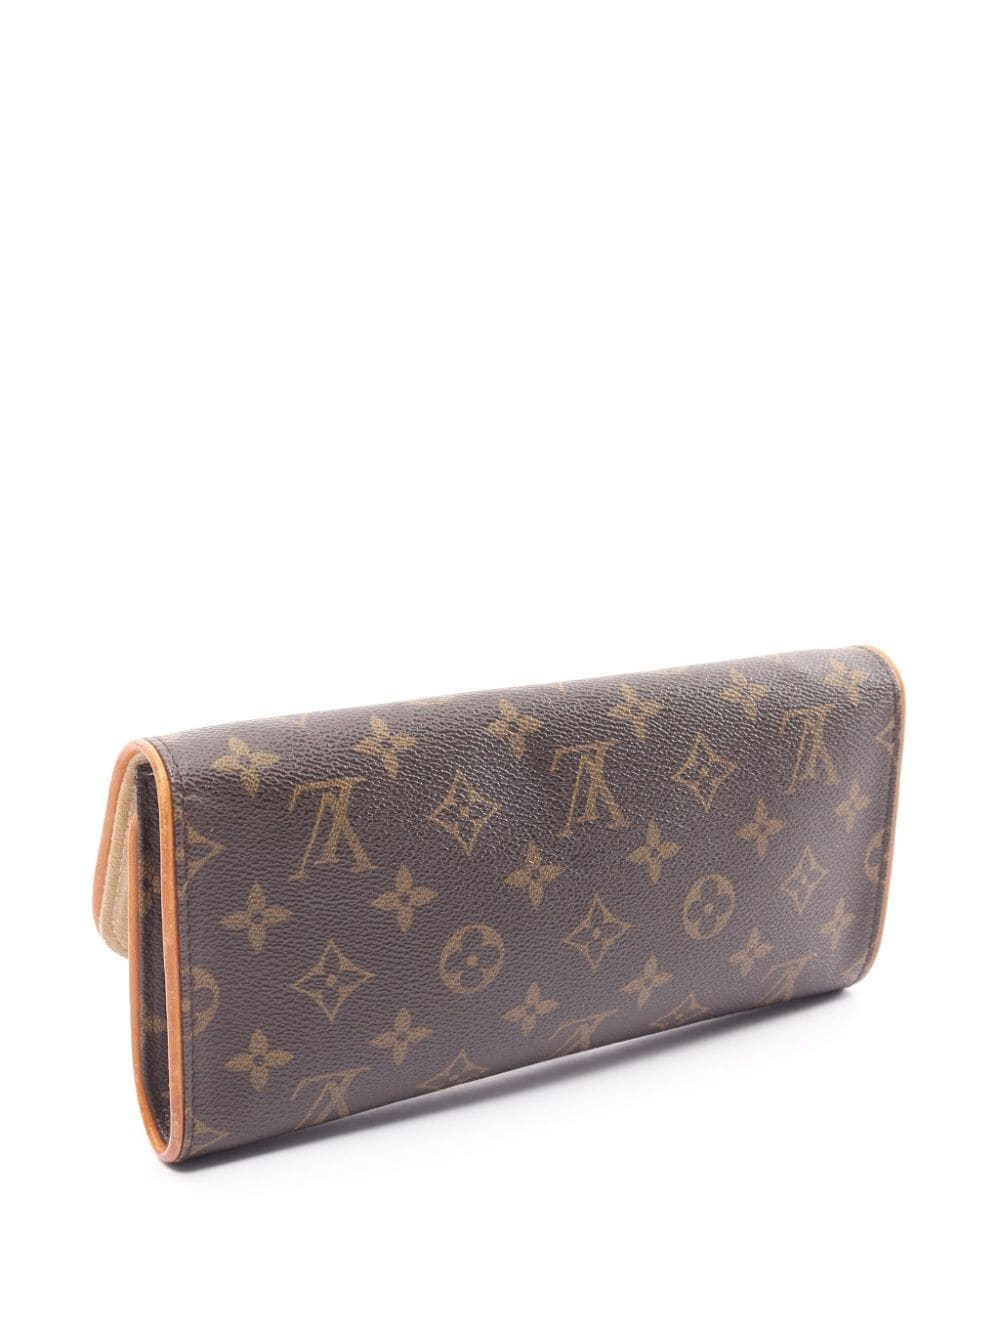 Pre-owned Louis Vuitton 2000 Pochette Twin Gm Clutch Bag In Brown